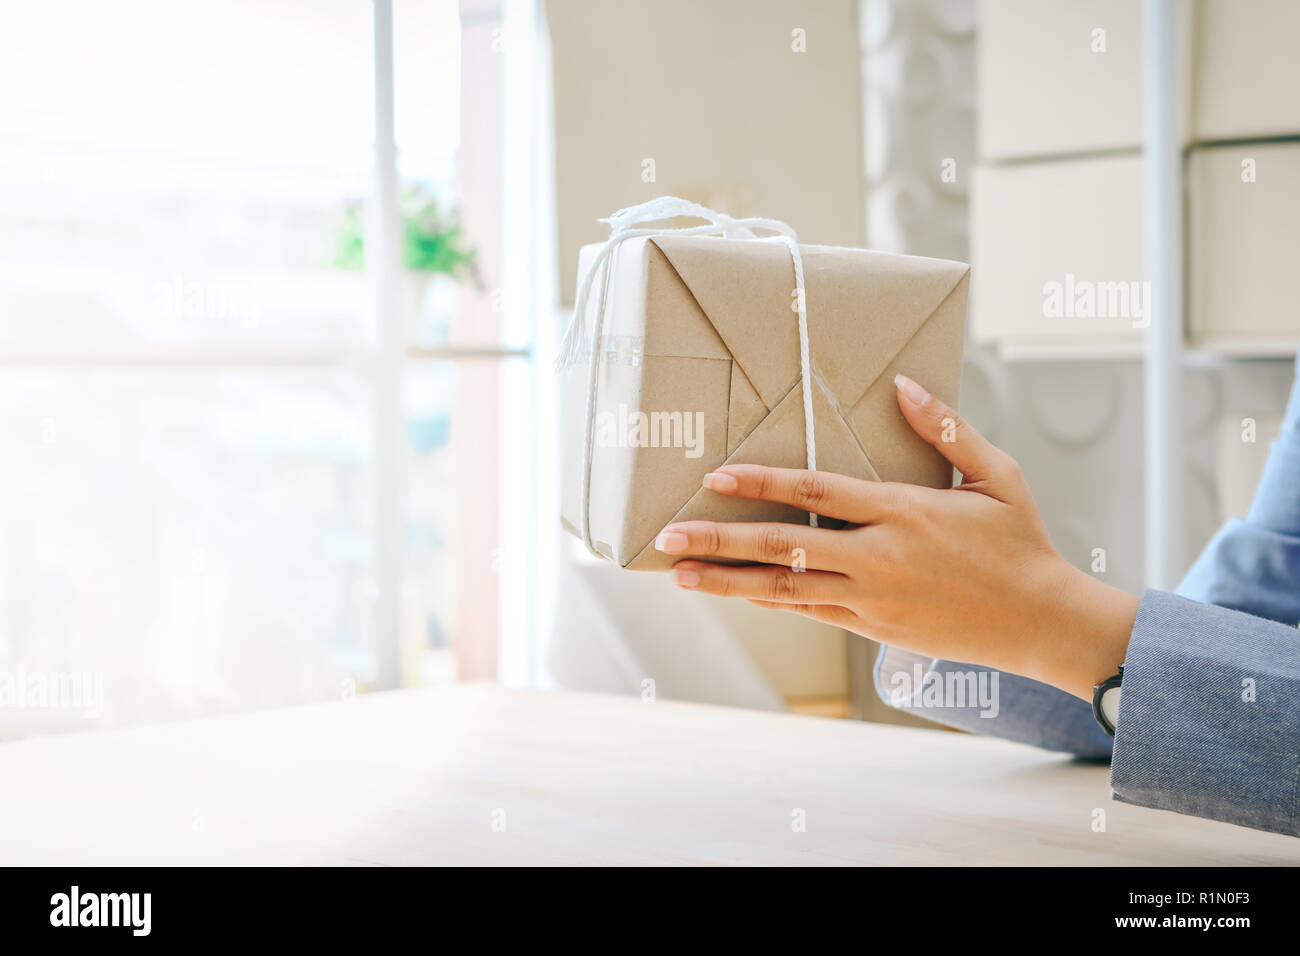 Close up hands holding gift box wrapped with kraft paper Stock Photo